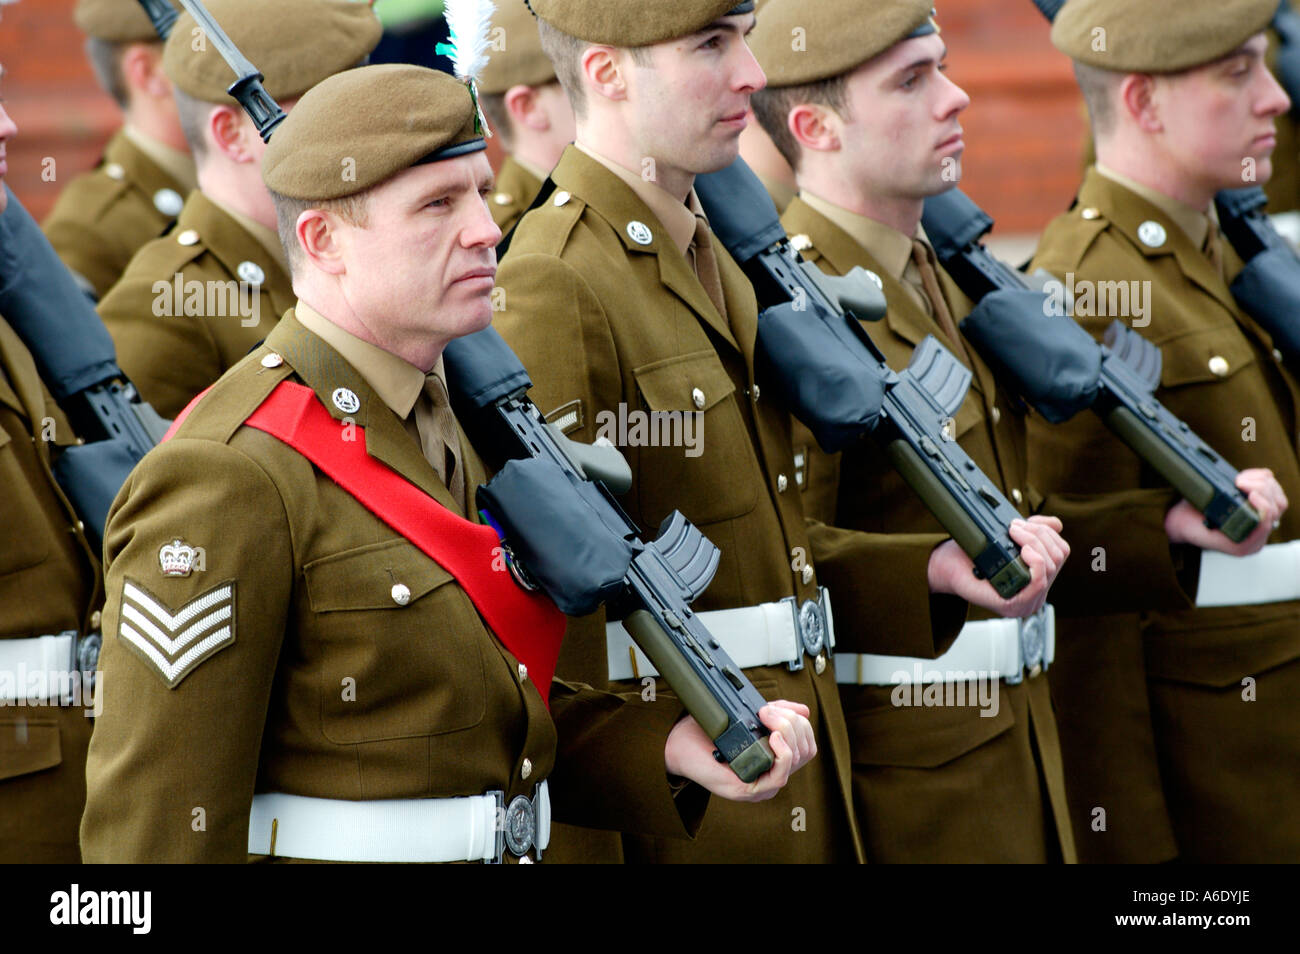 Ceremonial guard of honour at the opening of the Senedd National Assembly for Wales Cardiff Bay South Wales UK Stock Photo